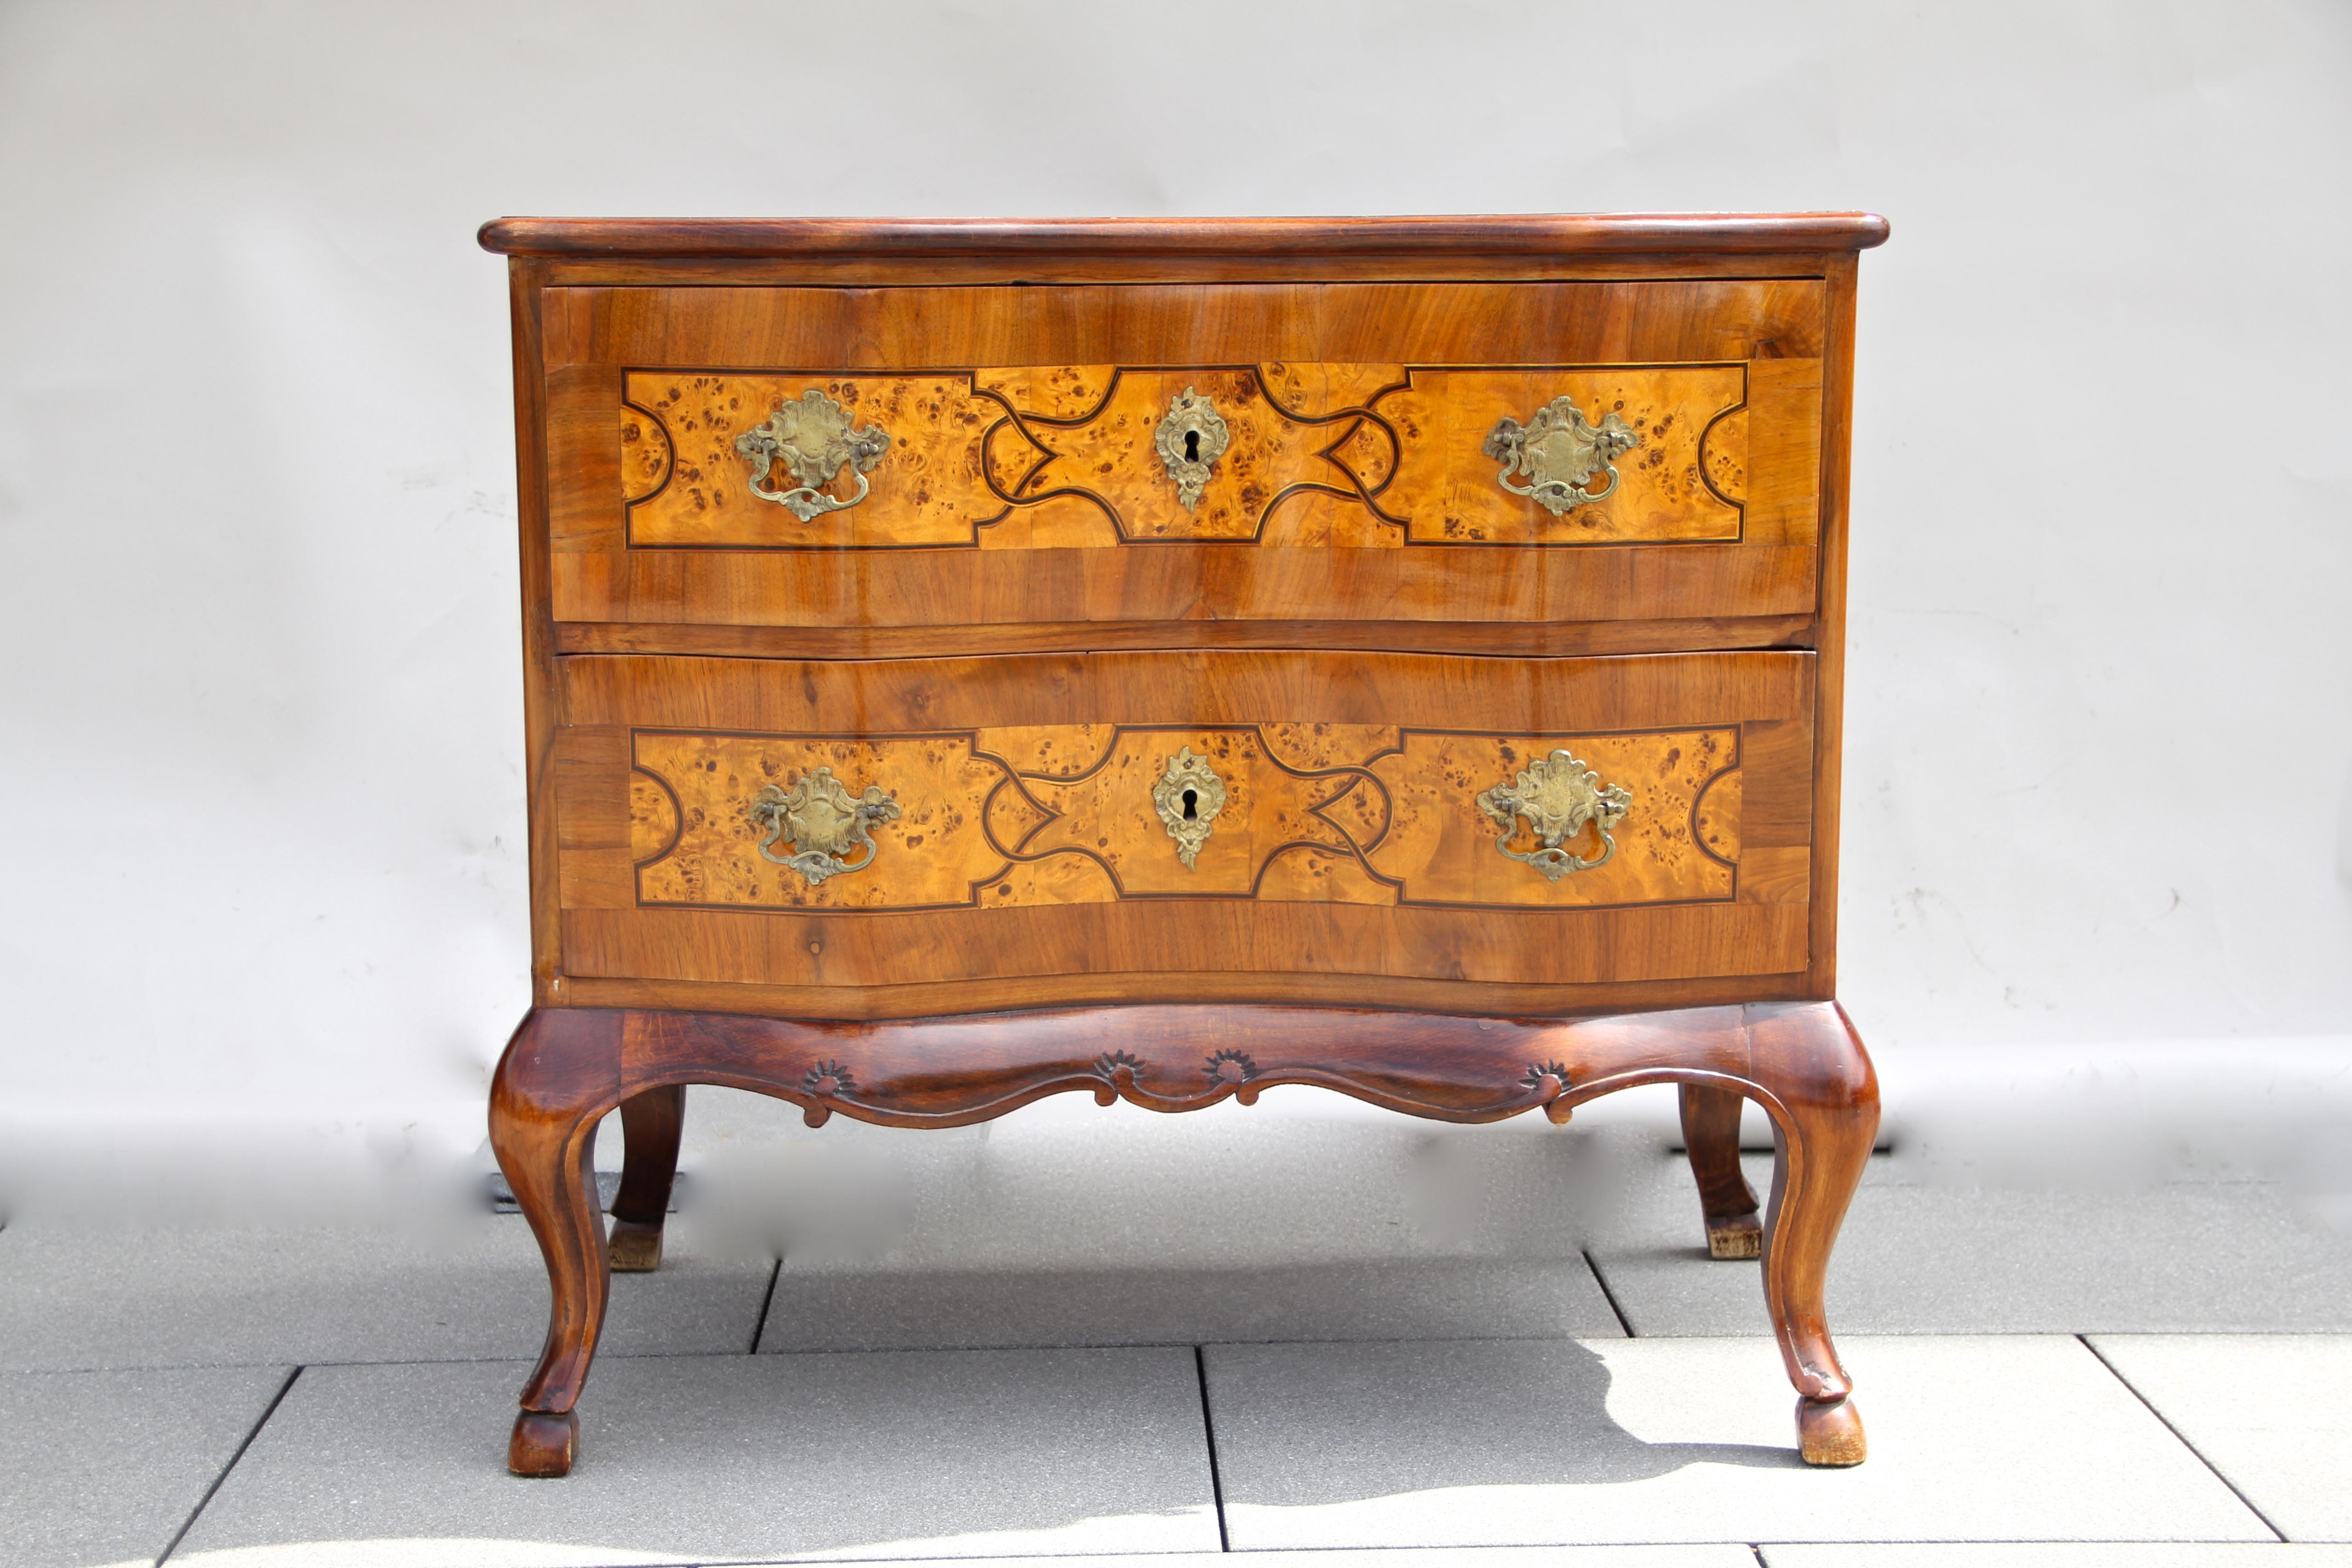 Unique Baroque Revival commode from circa 1890 in Austria. This mid-sized cabinet shows beautiful inlay works and comes with two gorgeous curved drawers. A great shaped hand carved base, wonderful brass fittings alongside a great designed marquetry